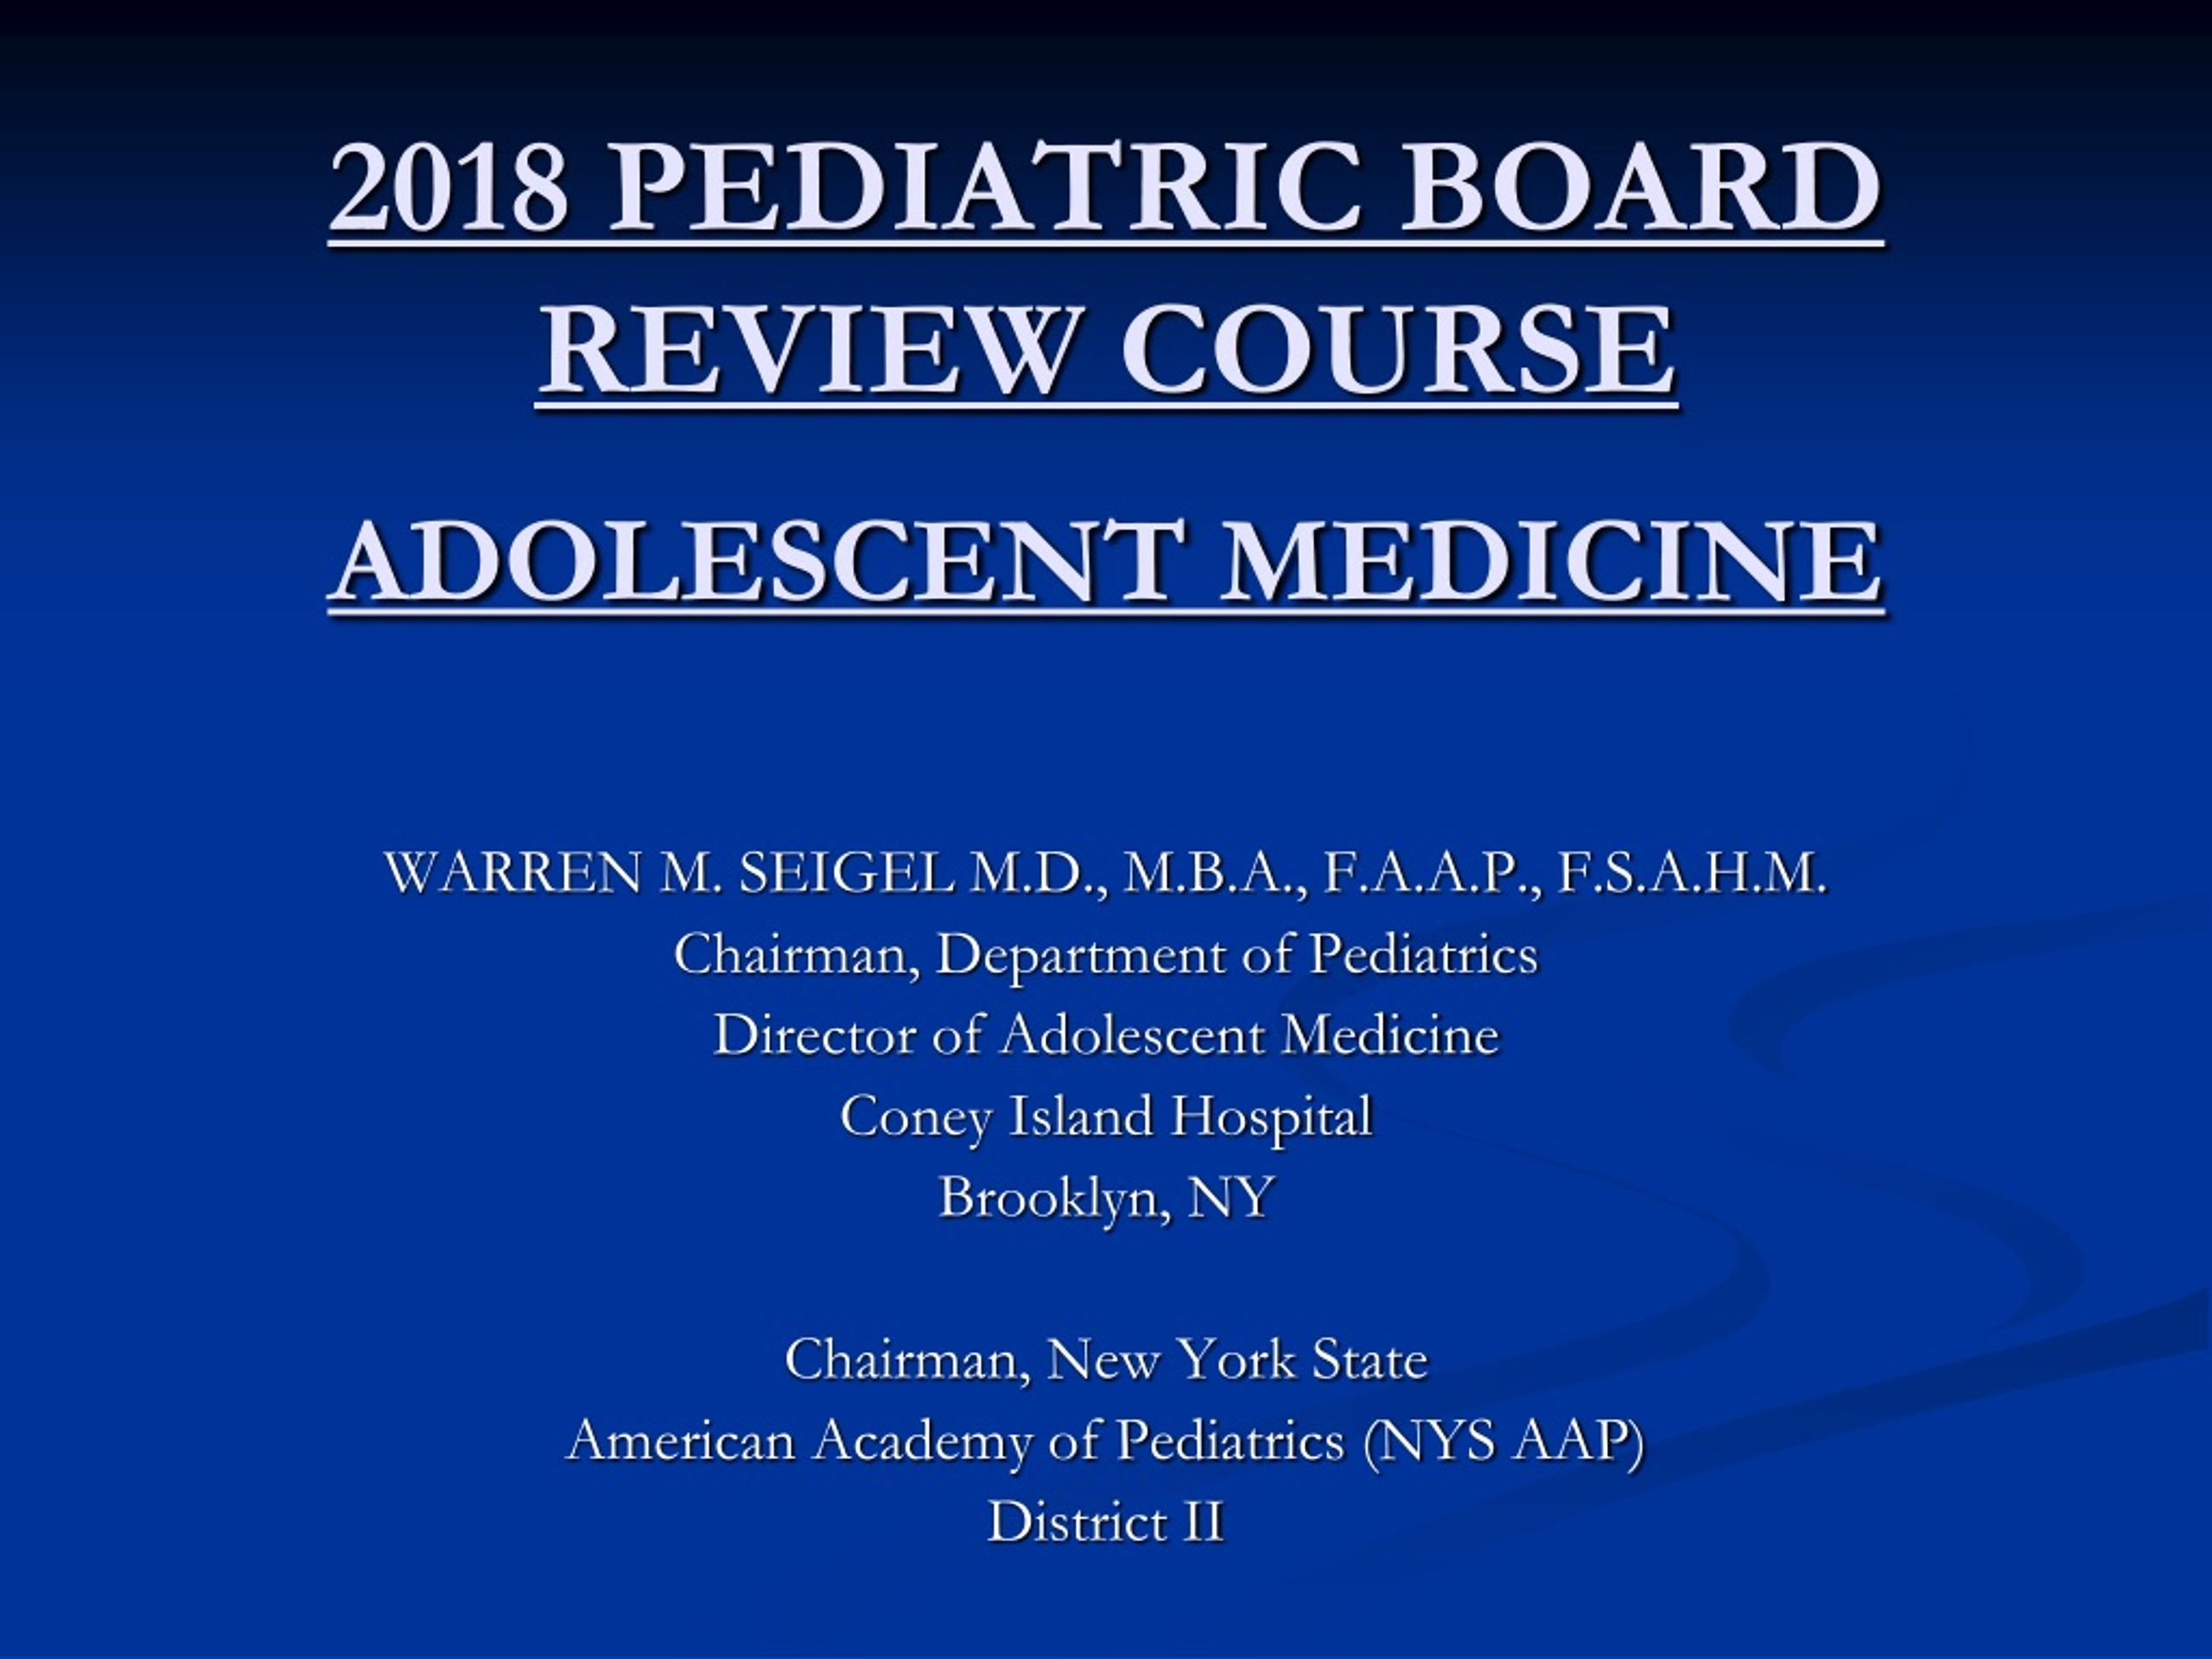 PPT 2018 PEDIATRIC BOARD REVIEW COURSE ADOLESCENT MEDICINE PowerPoint